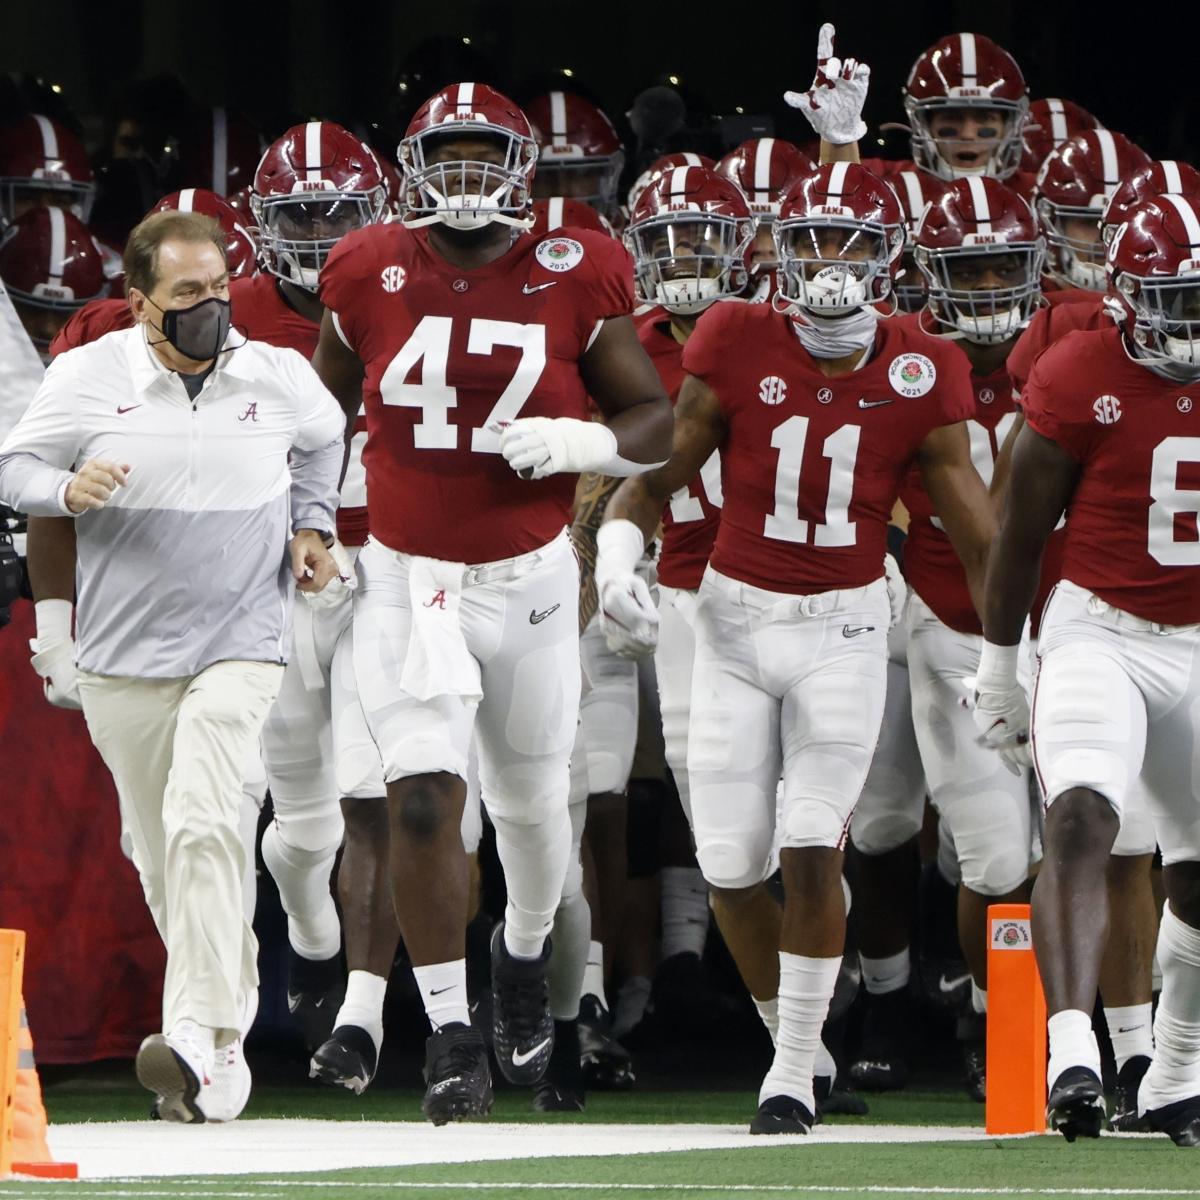 SEC Football Schedule 2021 Dates, Matchups and